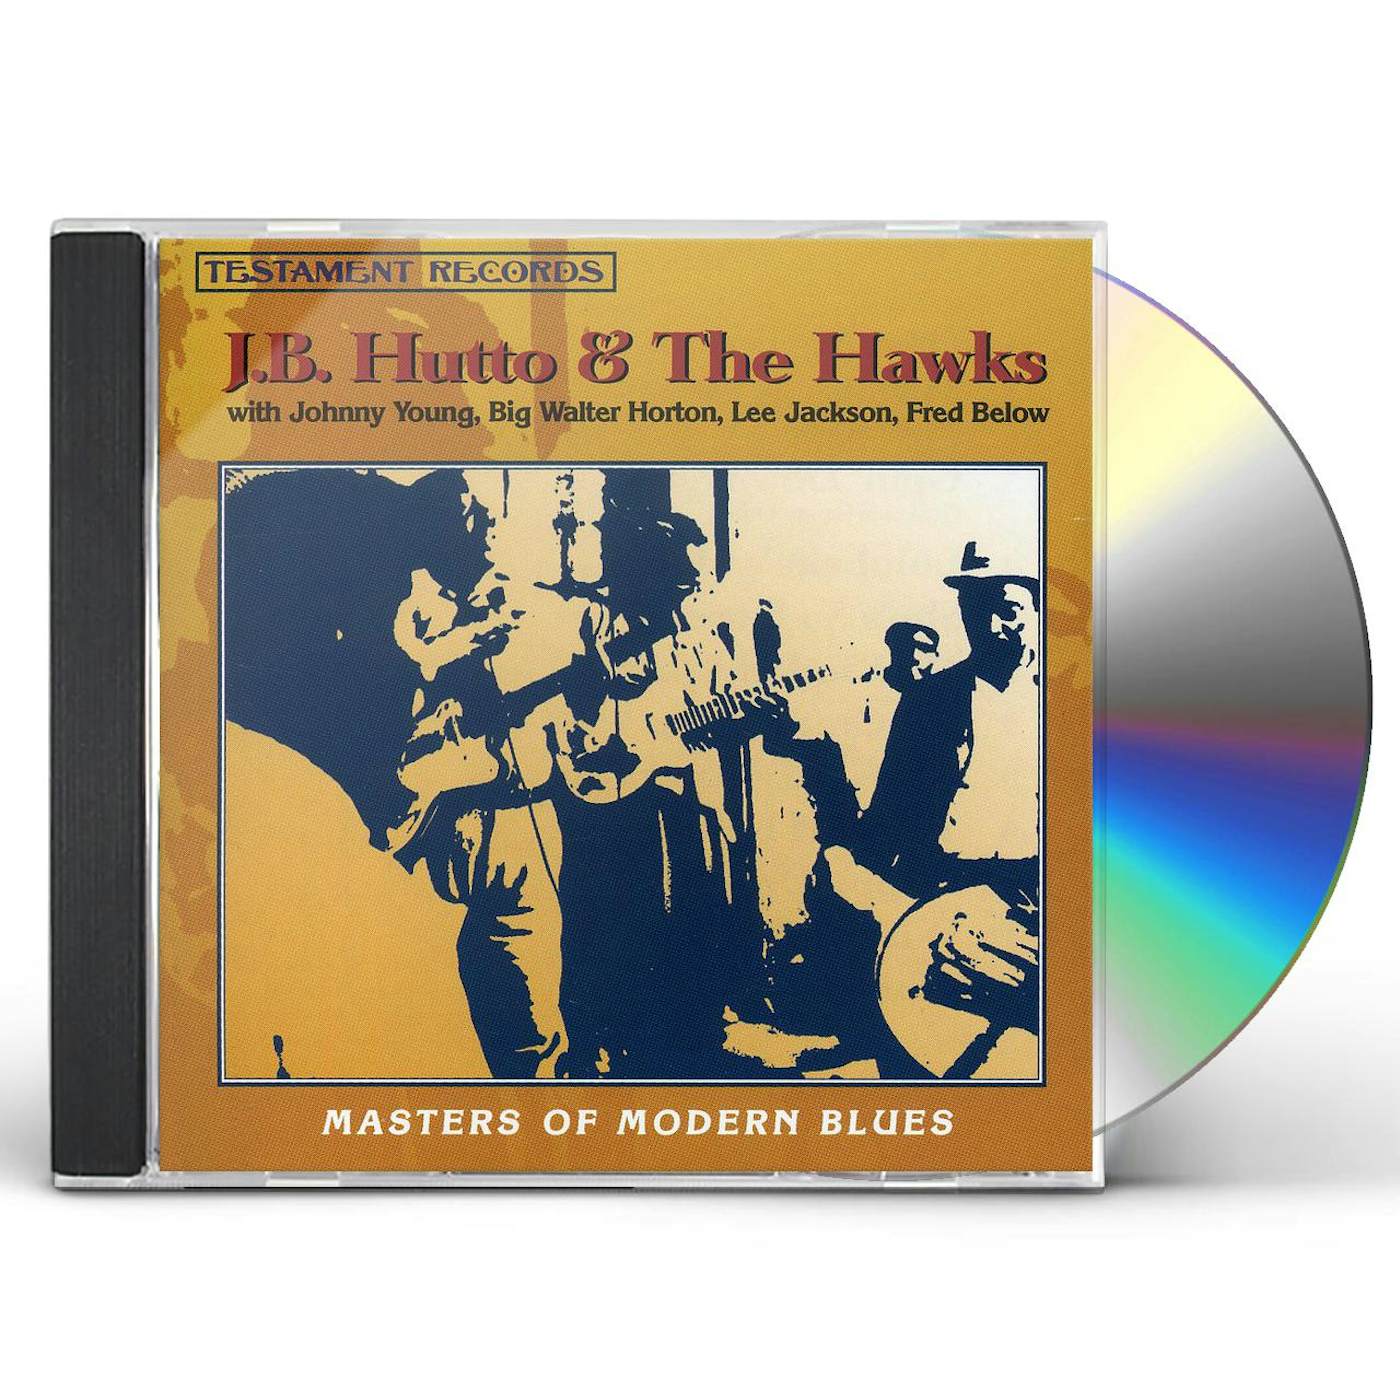 J. B. Hutto MASTERS OF THE MODERN BLUES CD